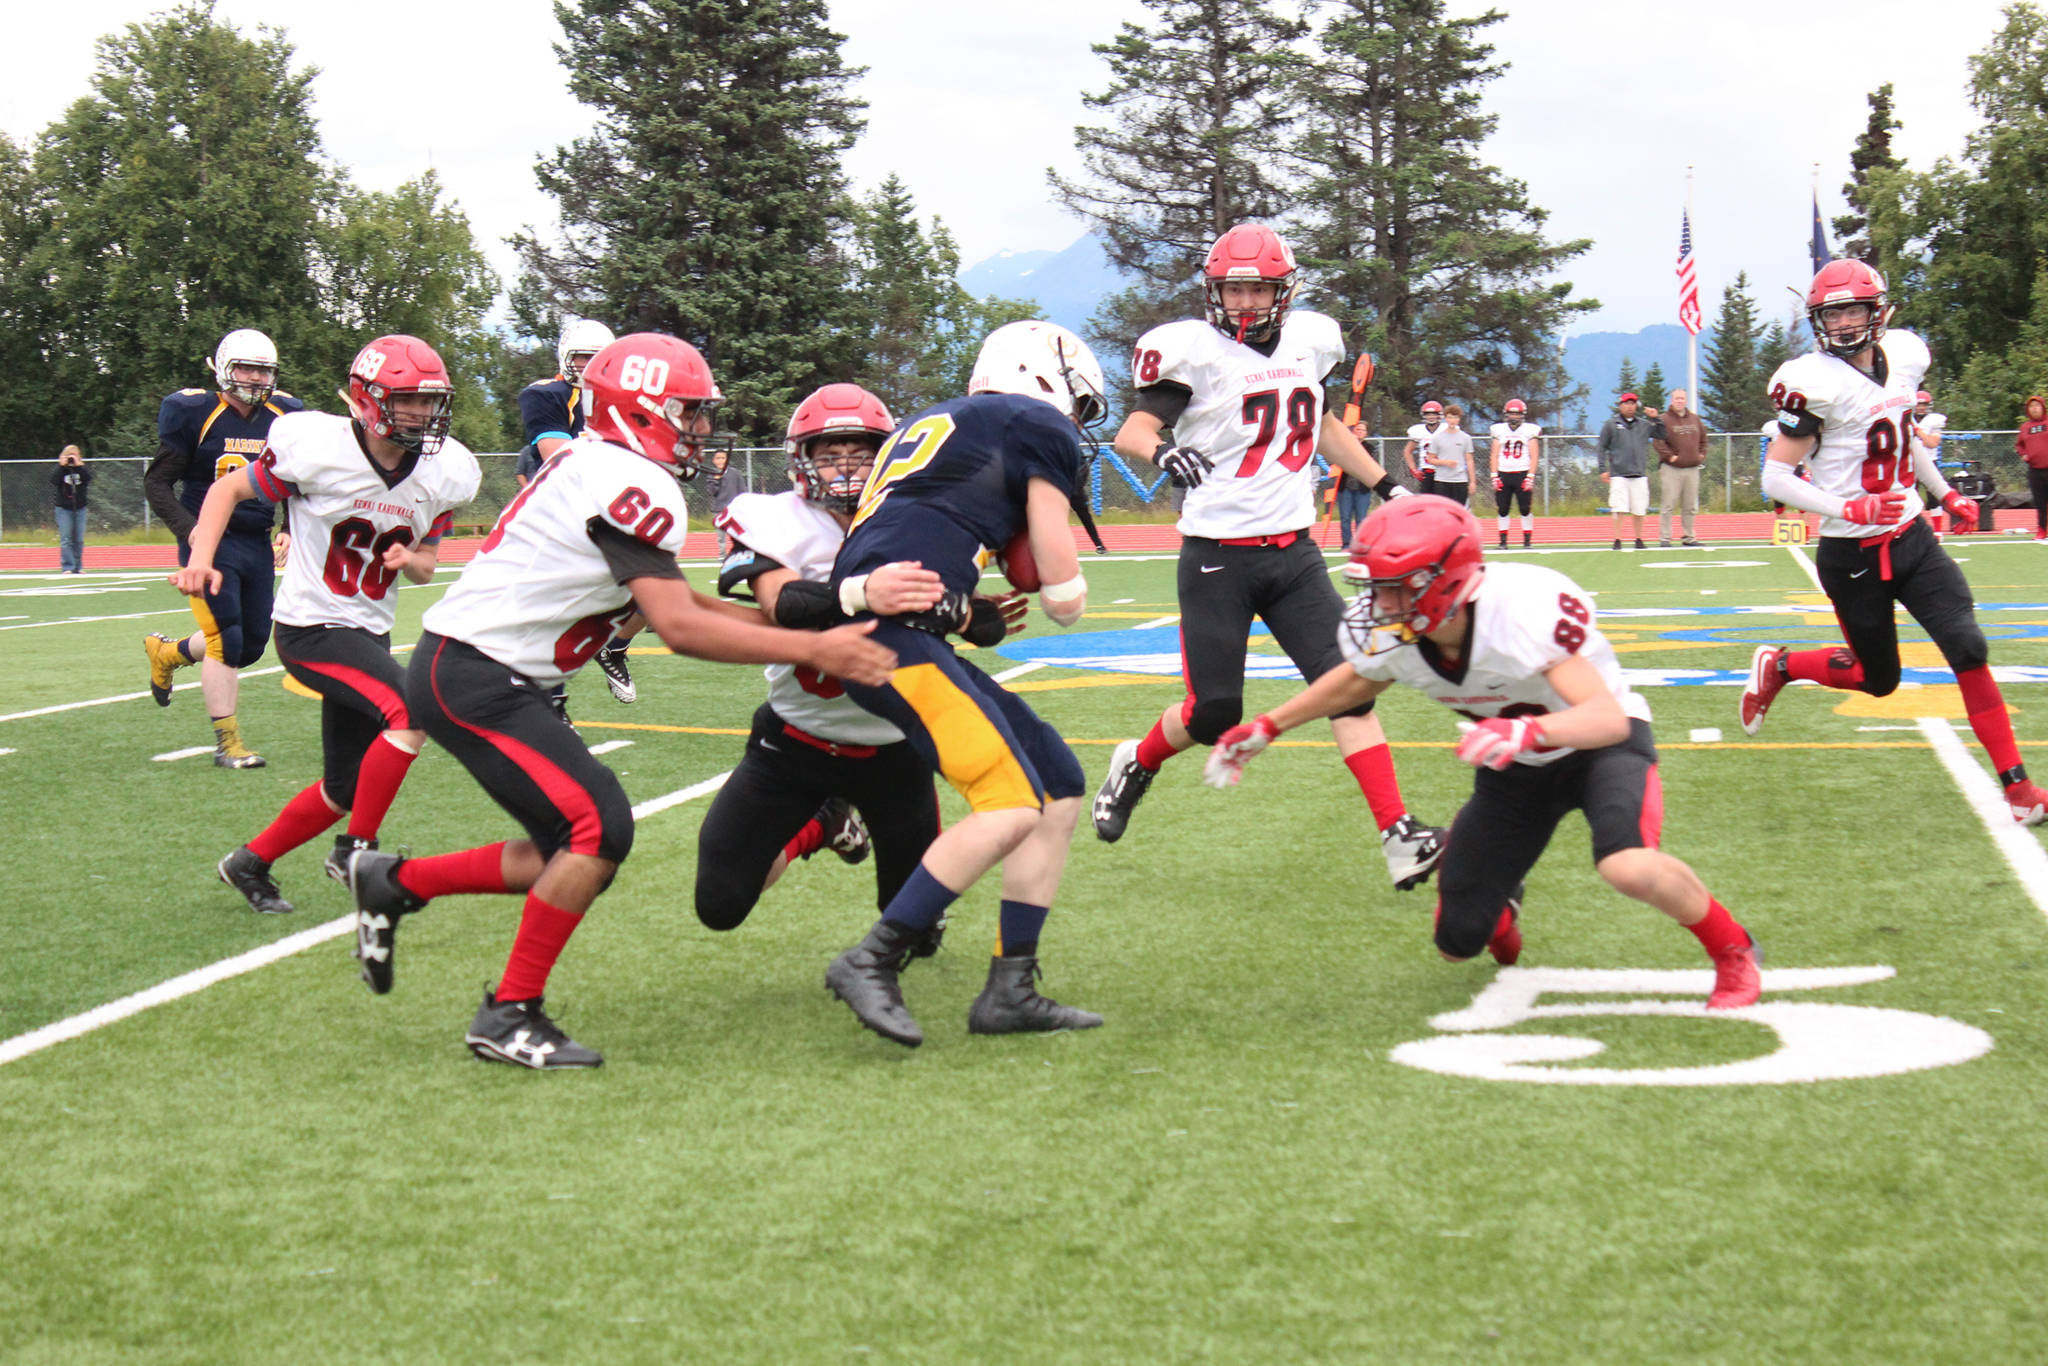 A group of Kardinal football players descend on Homer High School quarterback Anthony Kalugin during their game Friday, Aug. 17, 2018 at the high school in Homer, Alaska. Kenai Central High School beat the Mariners 58-6. (Photo by Megan Pacer/Homer News)